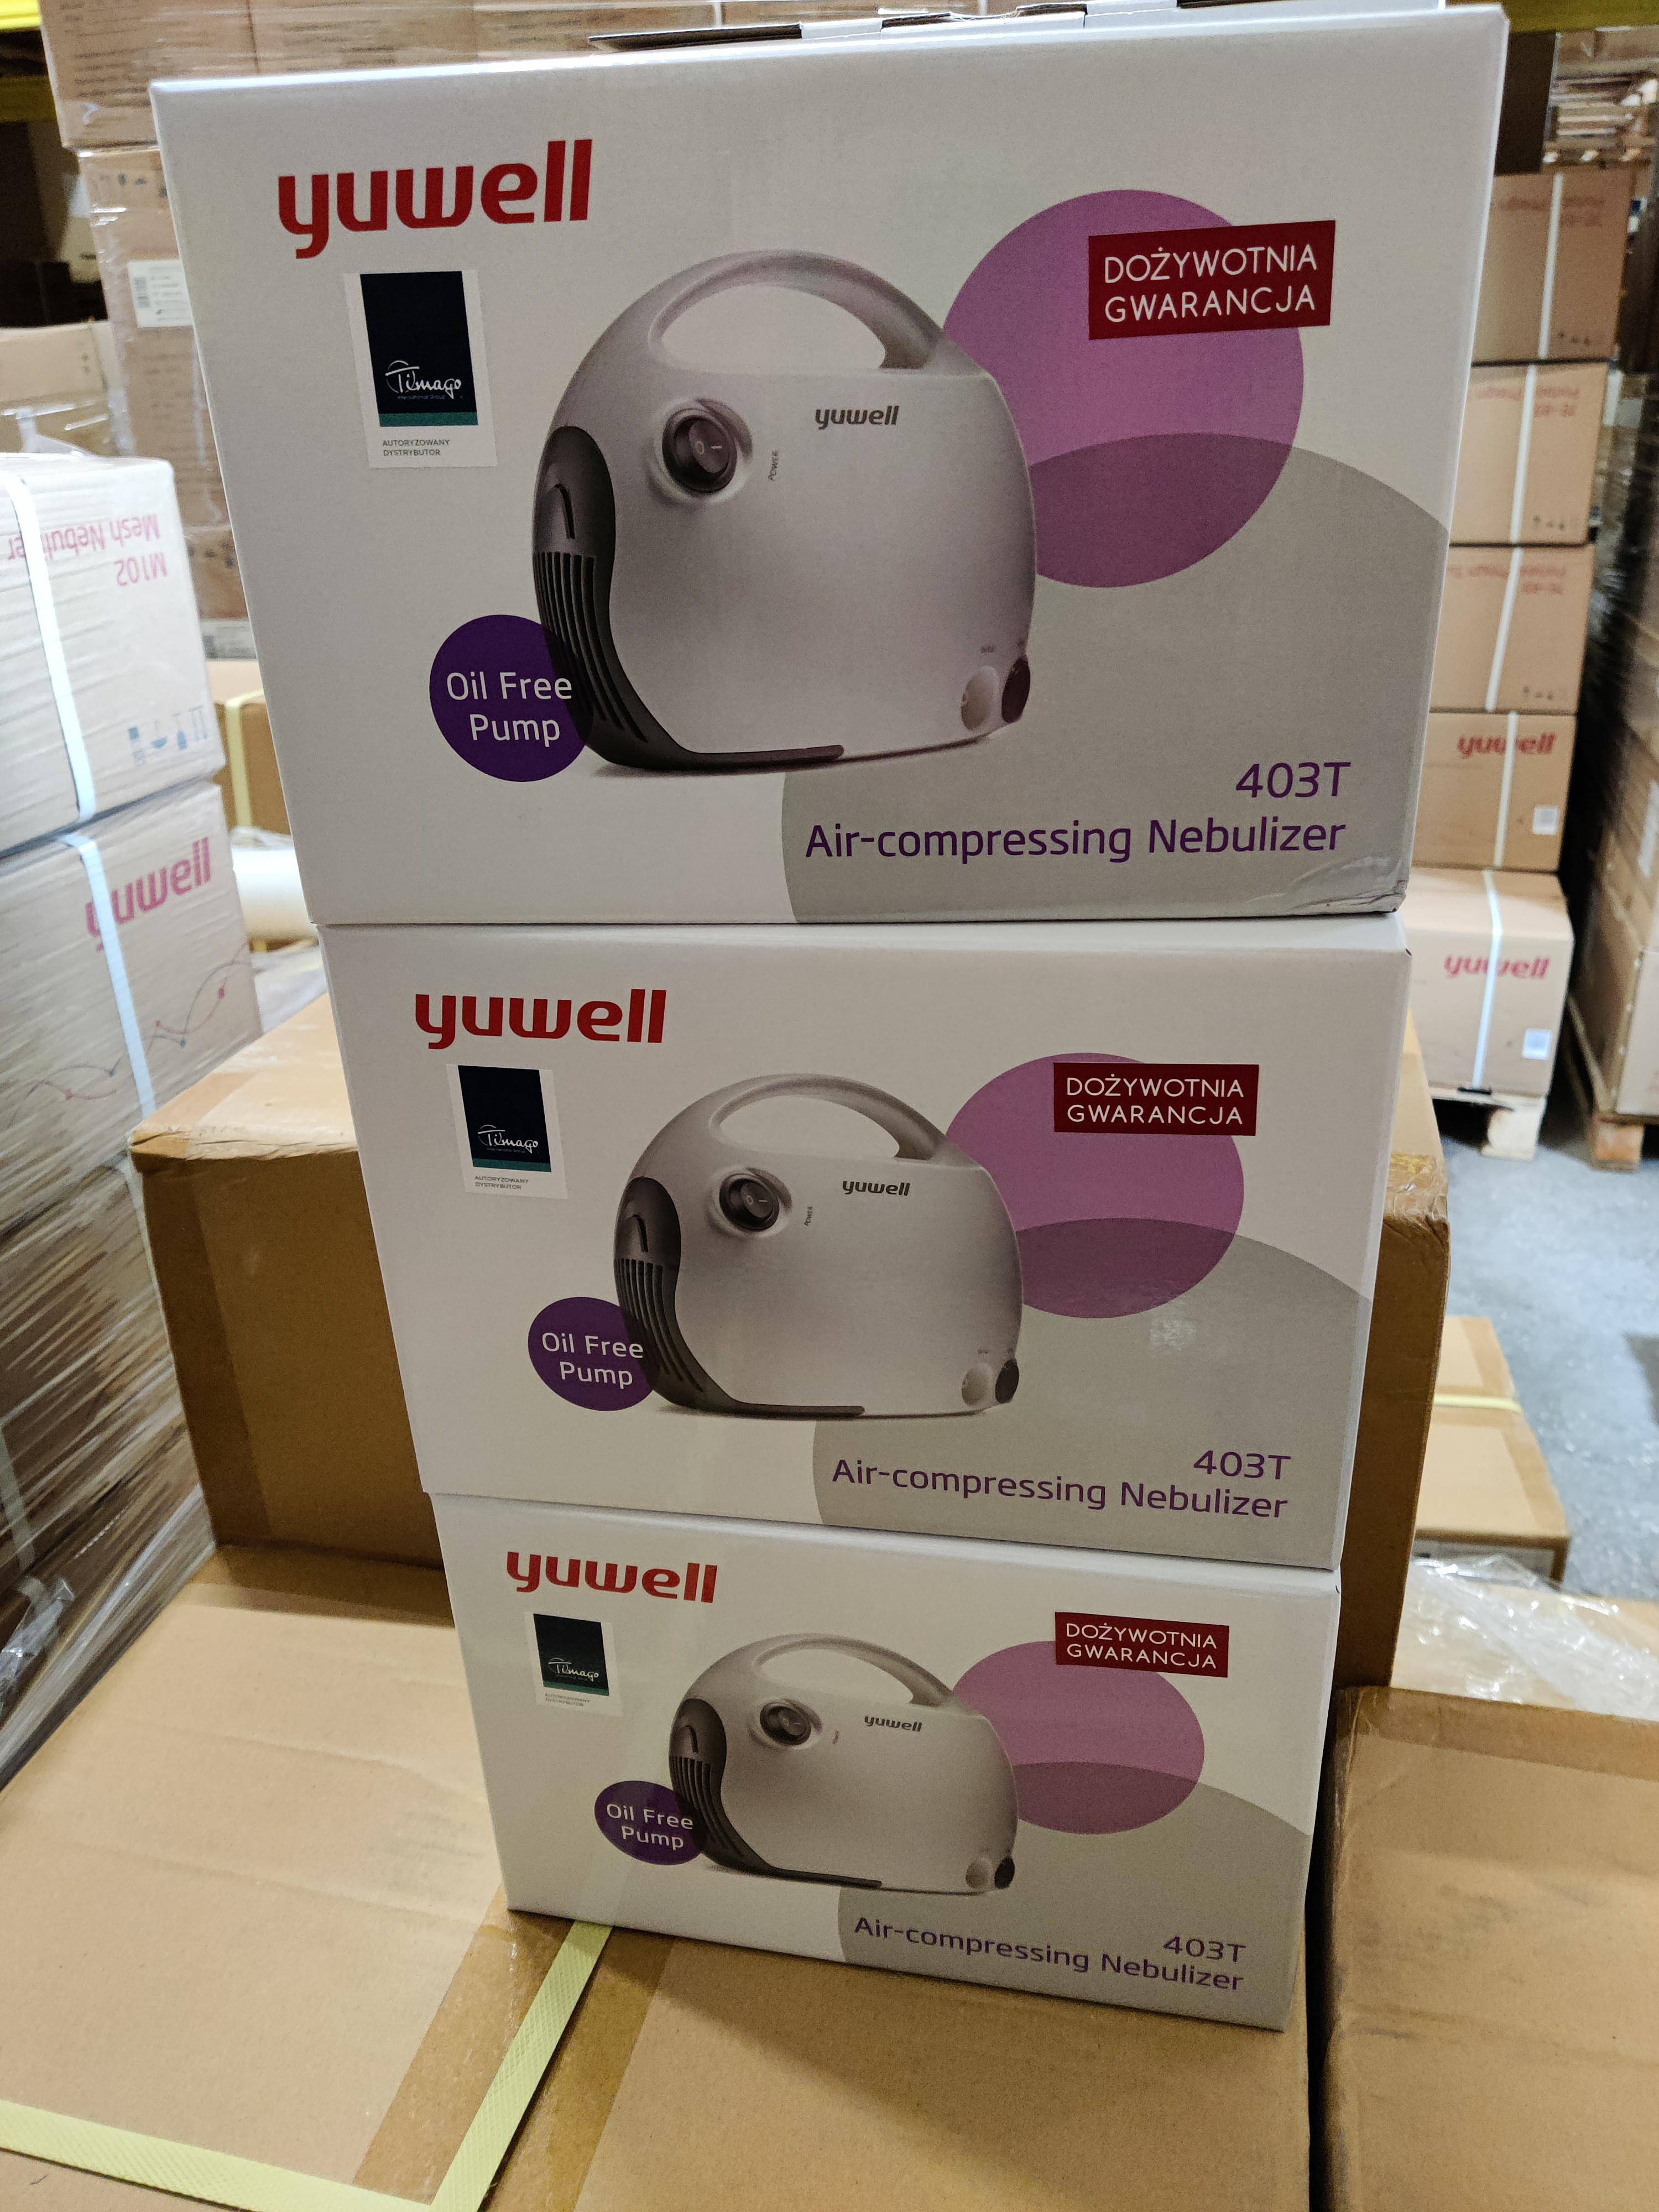 Possibility of free warranty extension for selected Yuwell products